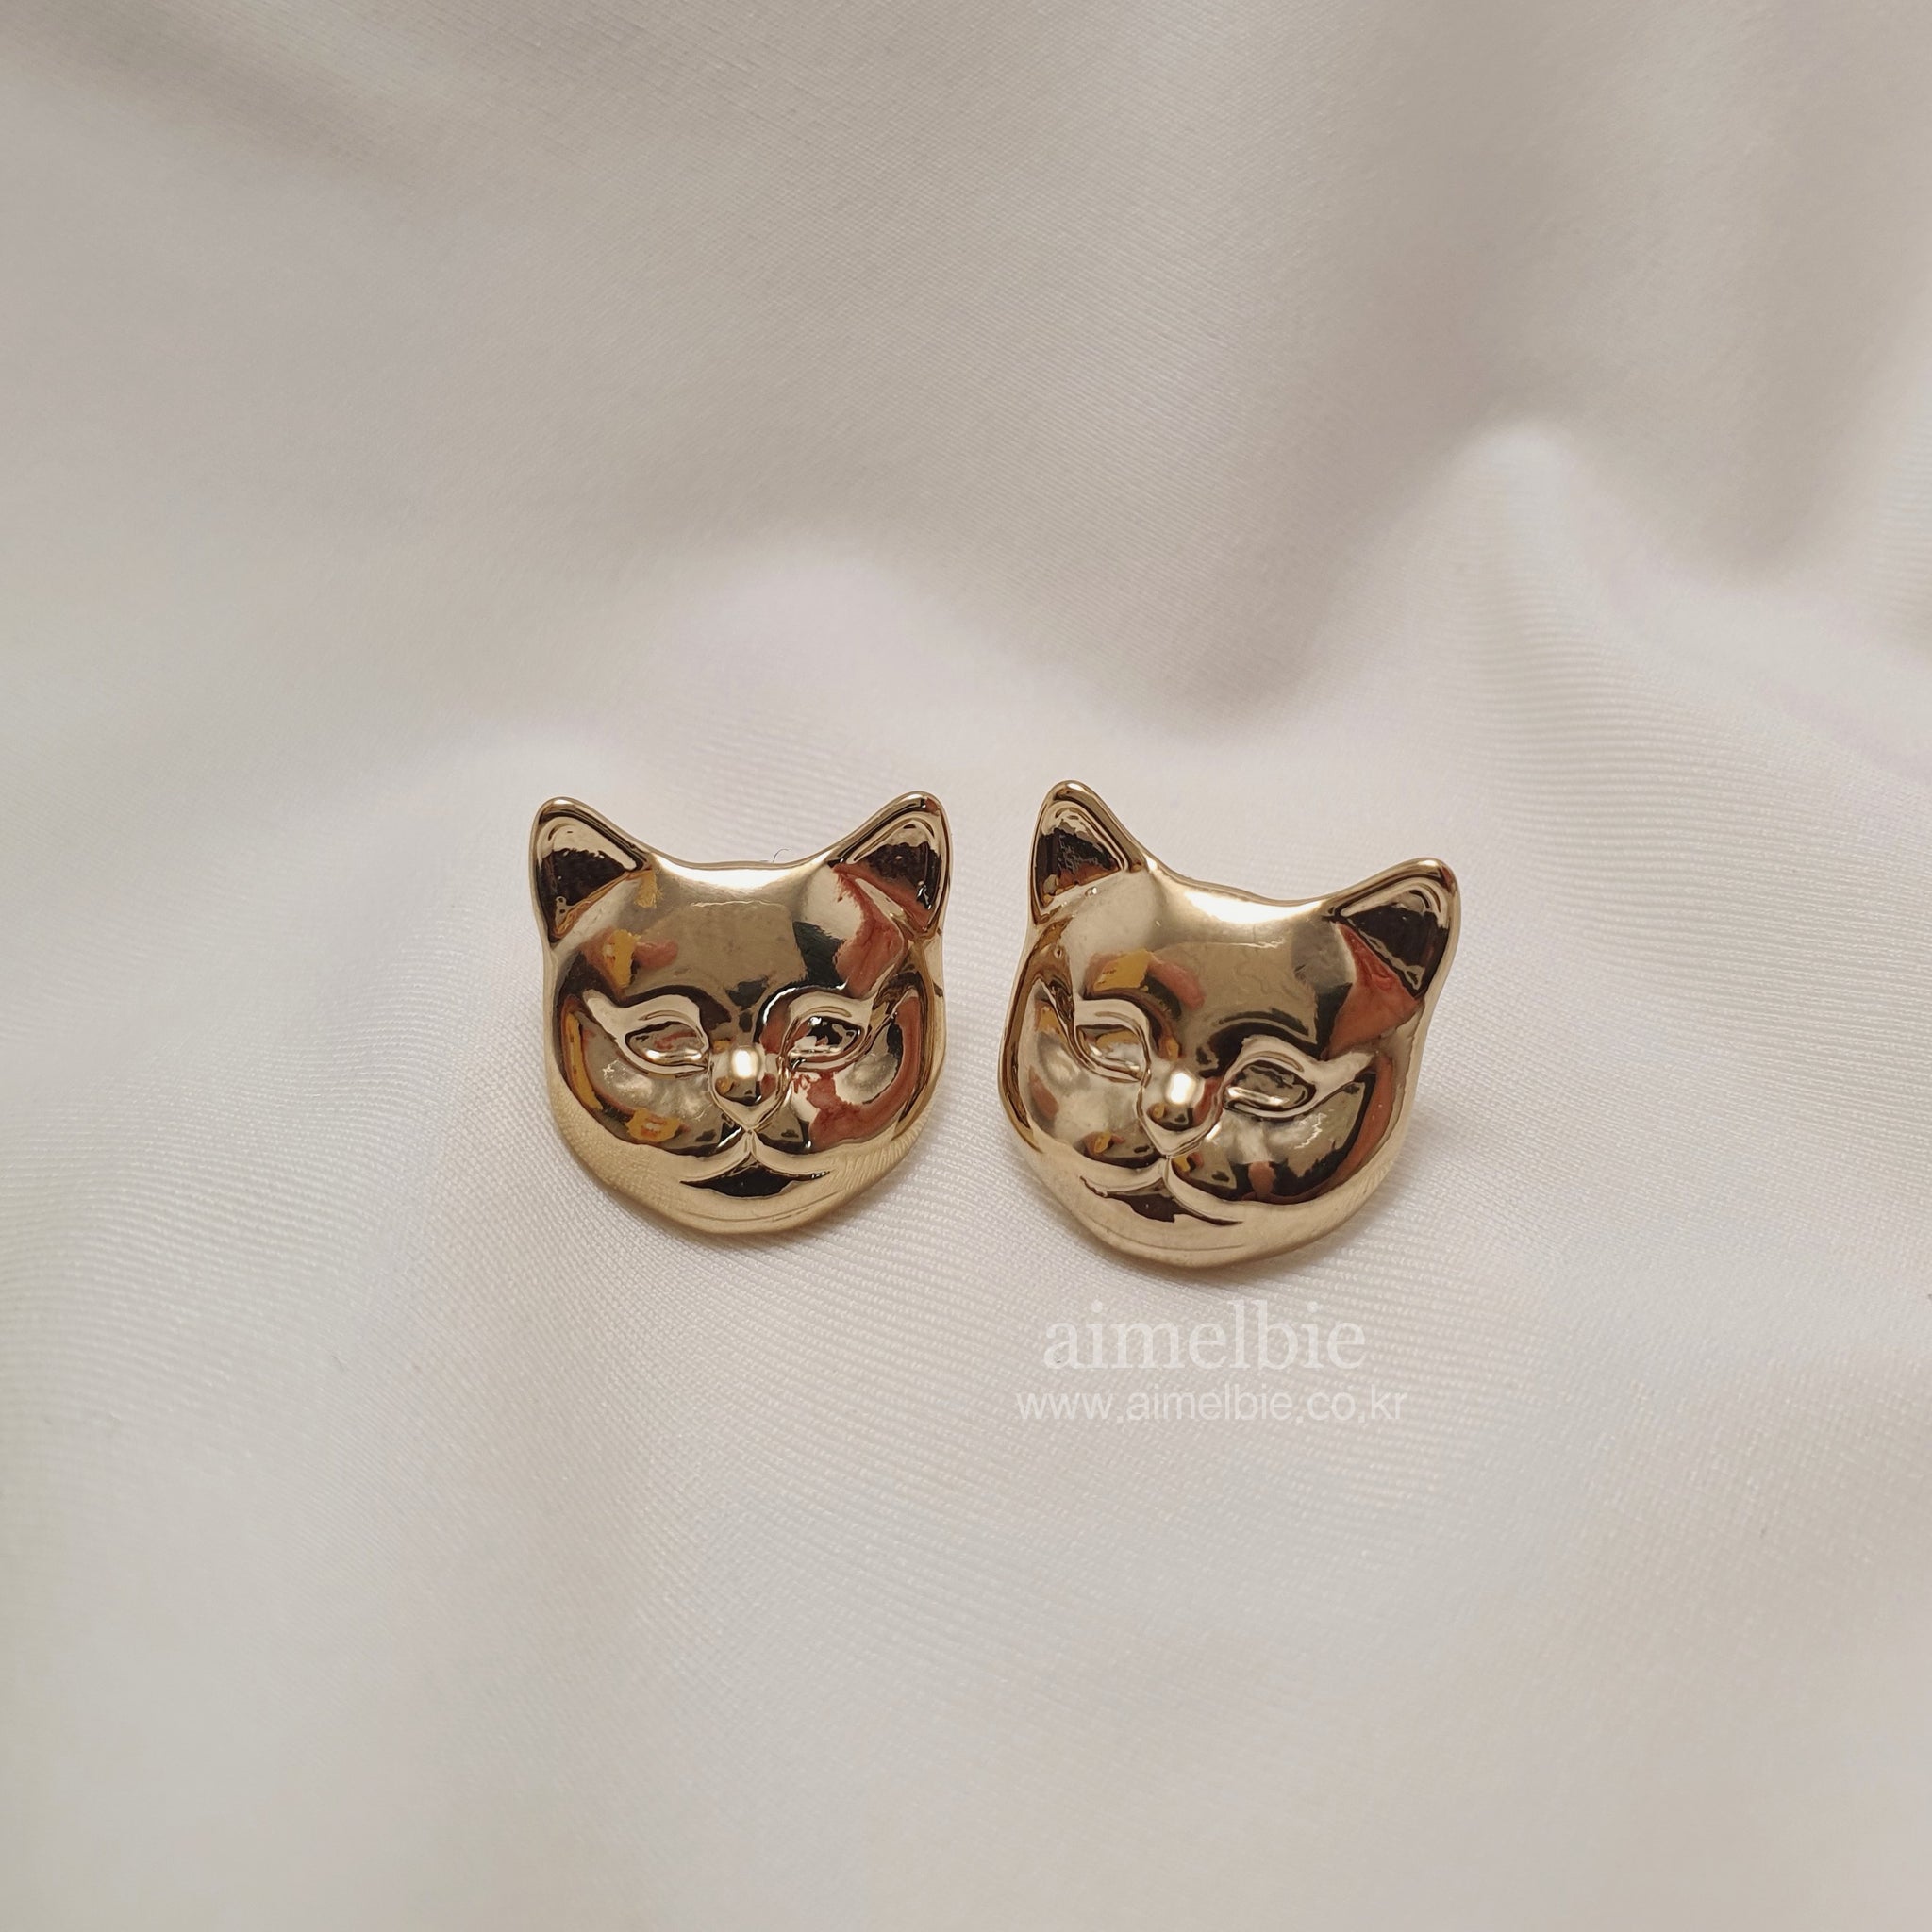 14K Solid Gold Smiling Cat Earrings